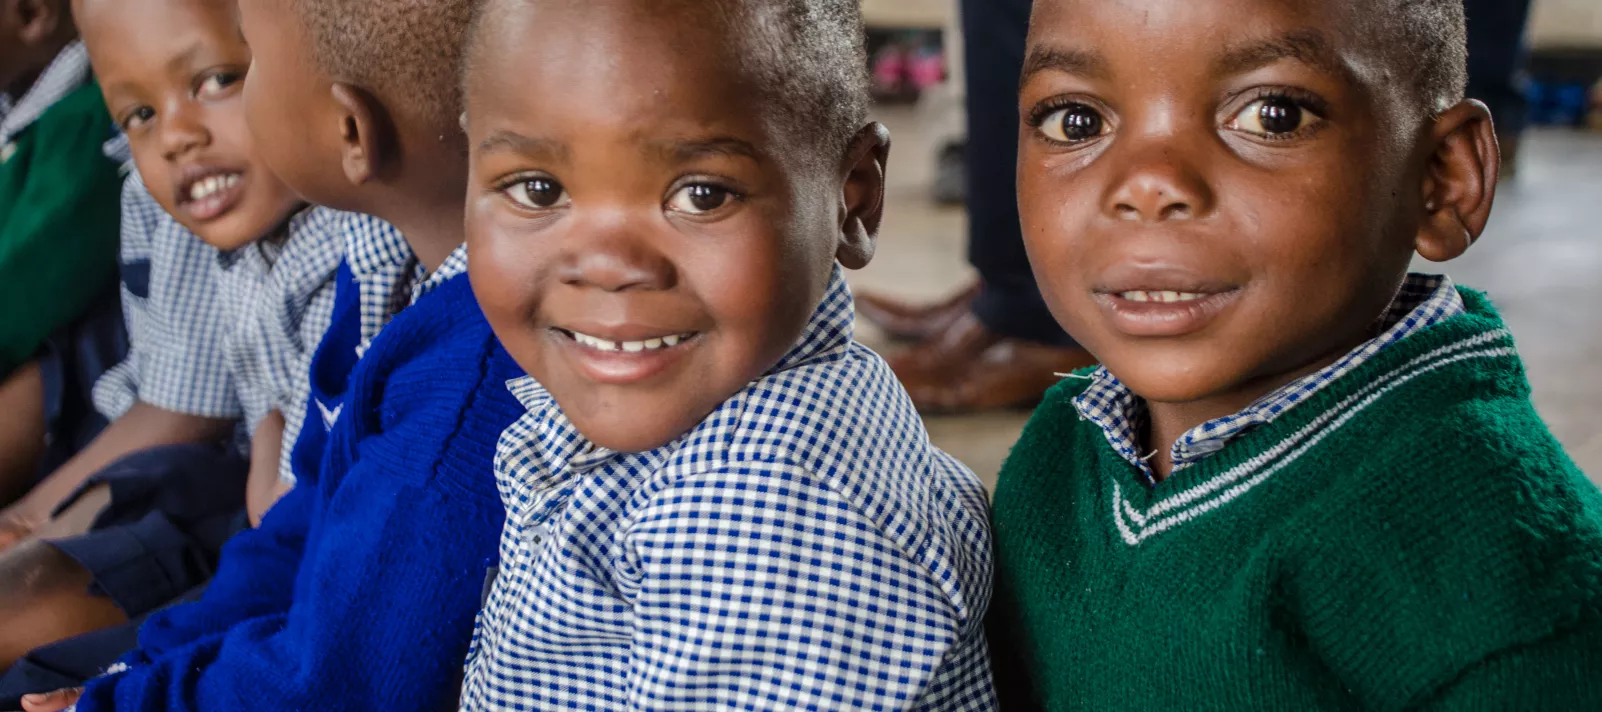 Three young children smile together in a pre-primary school